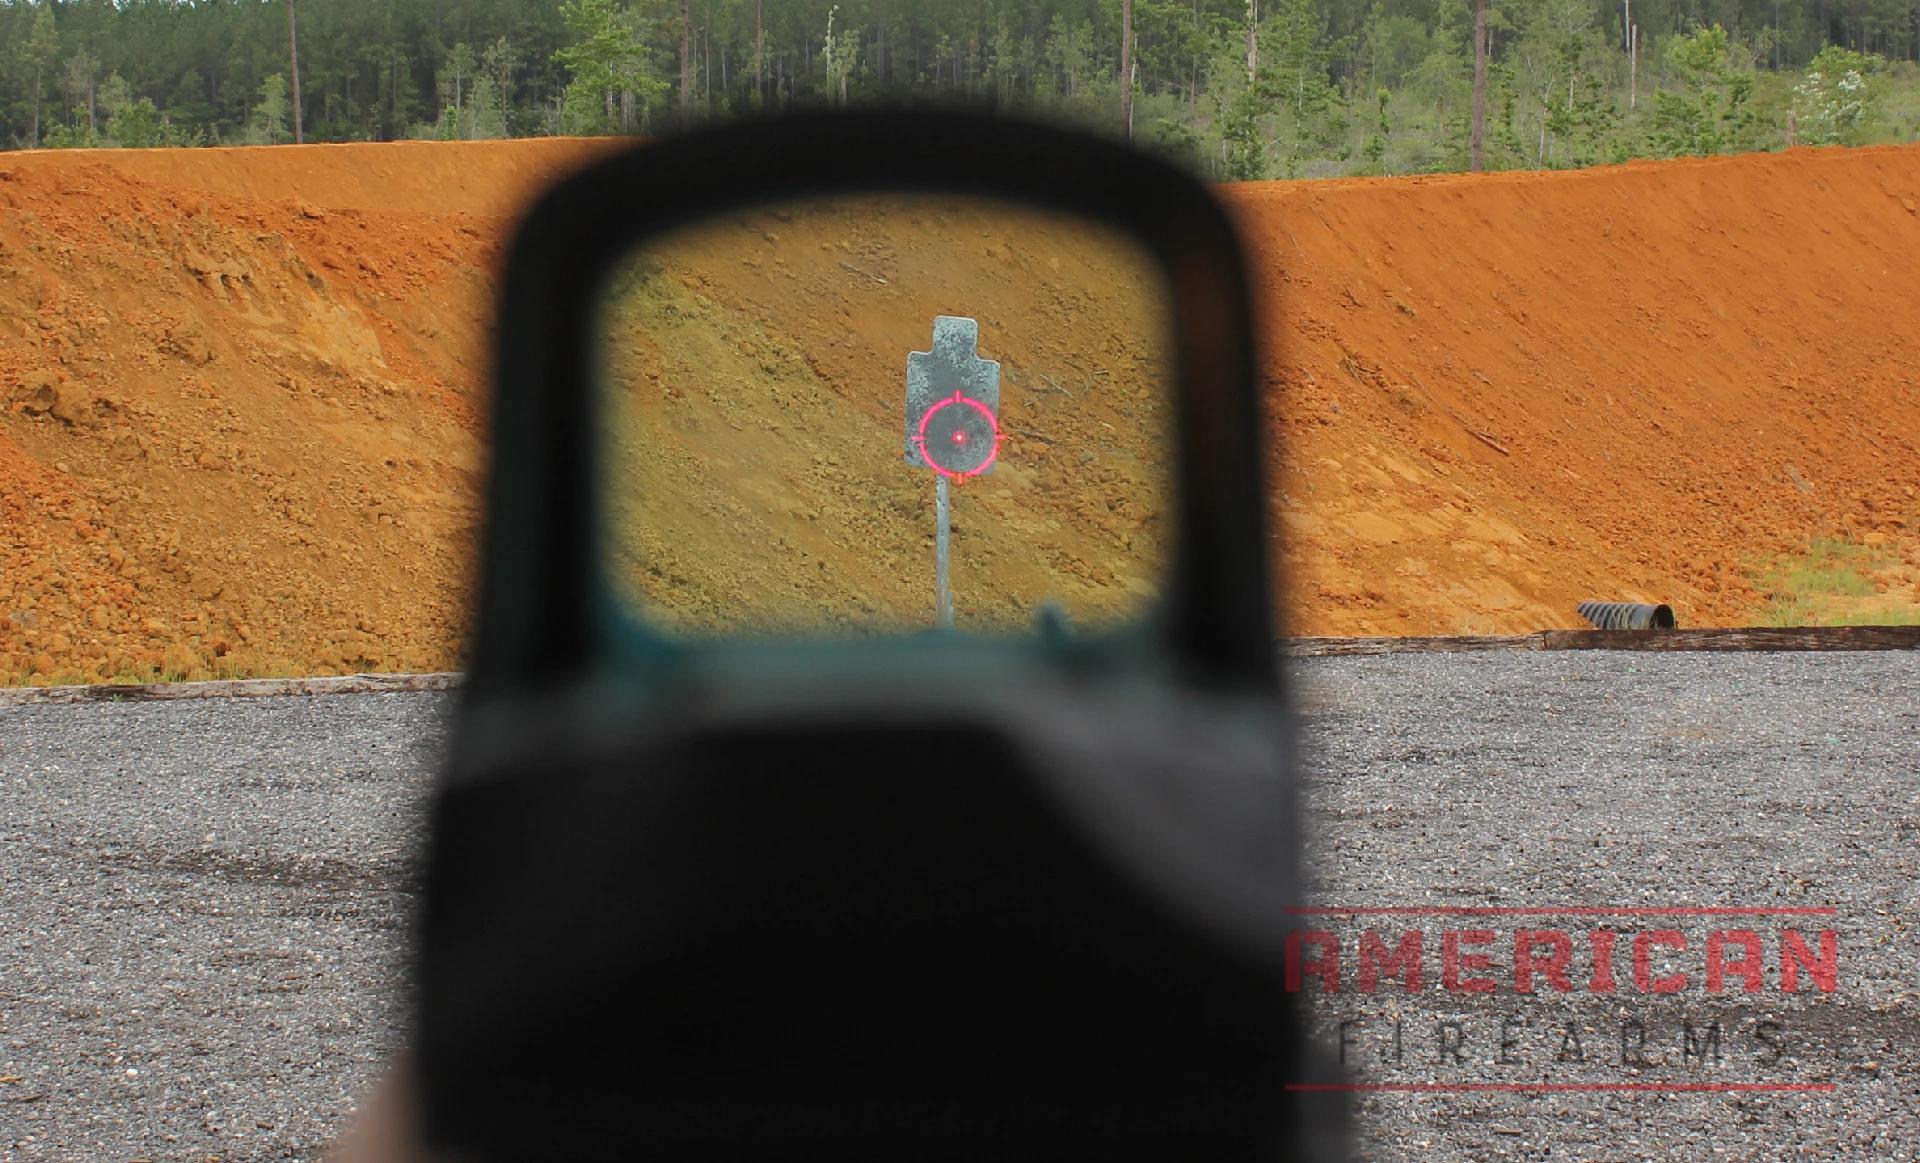 20 yards out with the 510C gives you a fantastic sight picture.